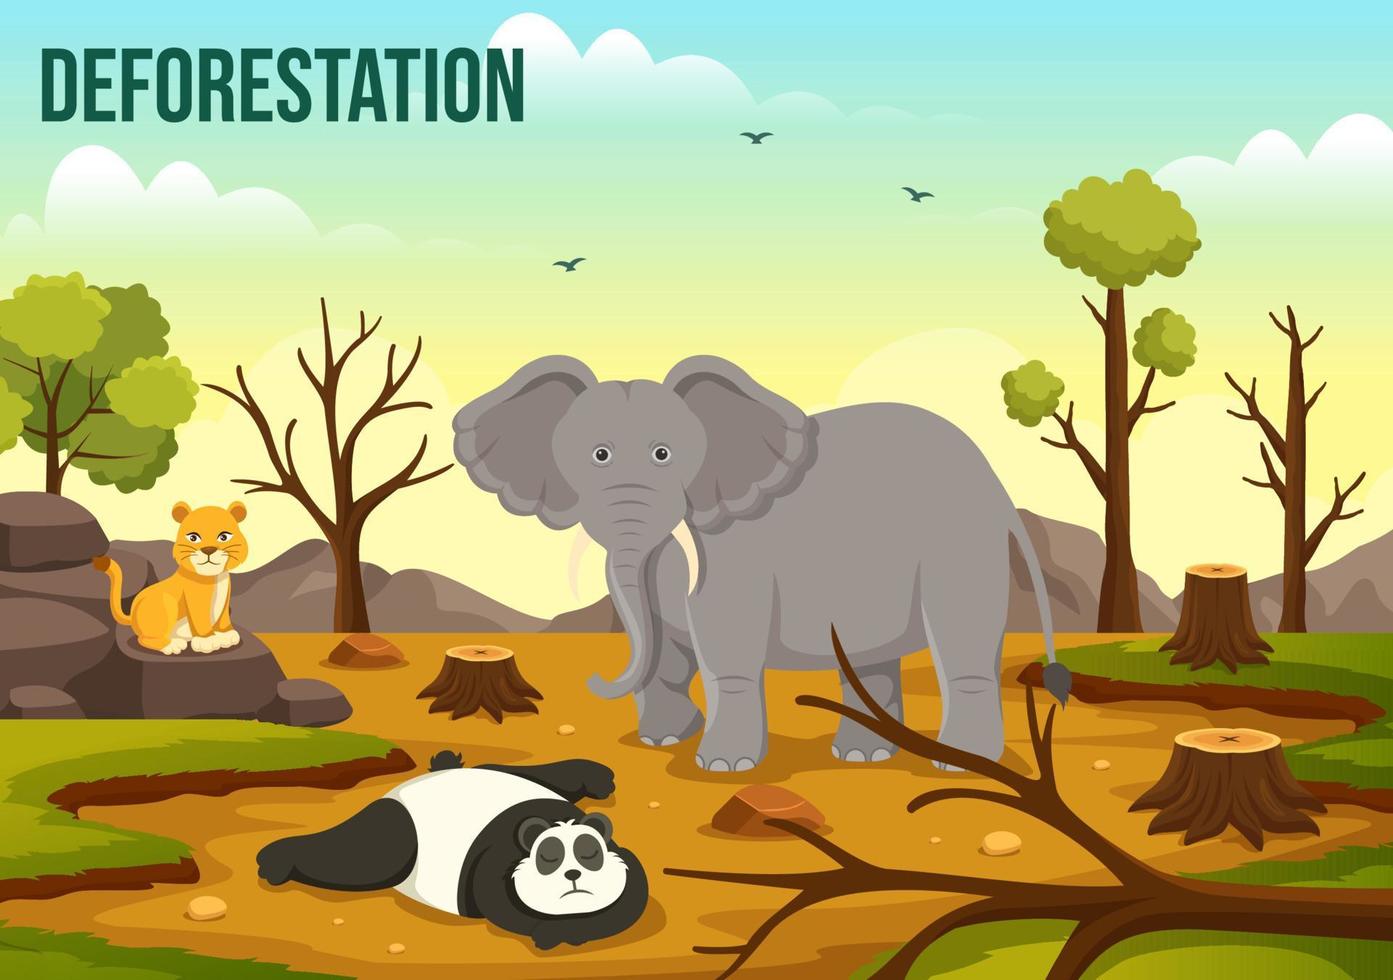 Deforestation Illustration with Tree in the Felled Forest and Burning Into Pollution Causing the Extinction of Animals in Cartoon Hand Drawn Templates vector